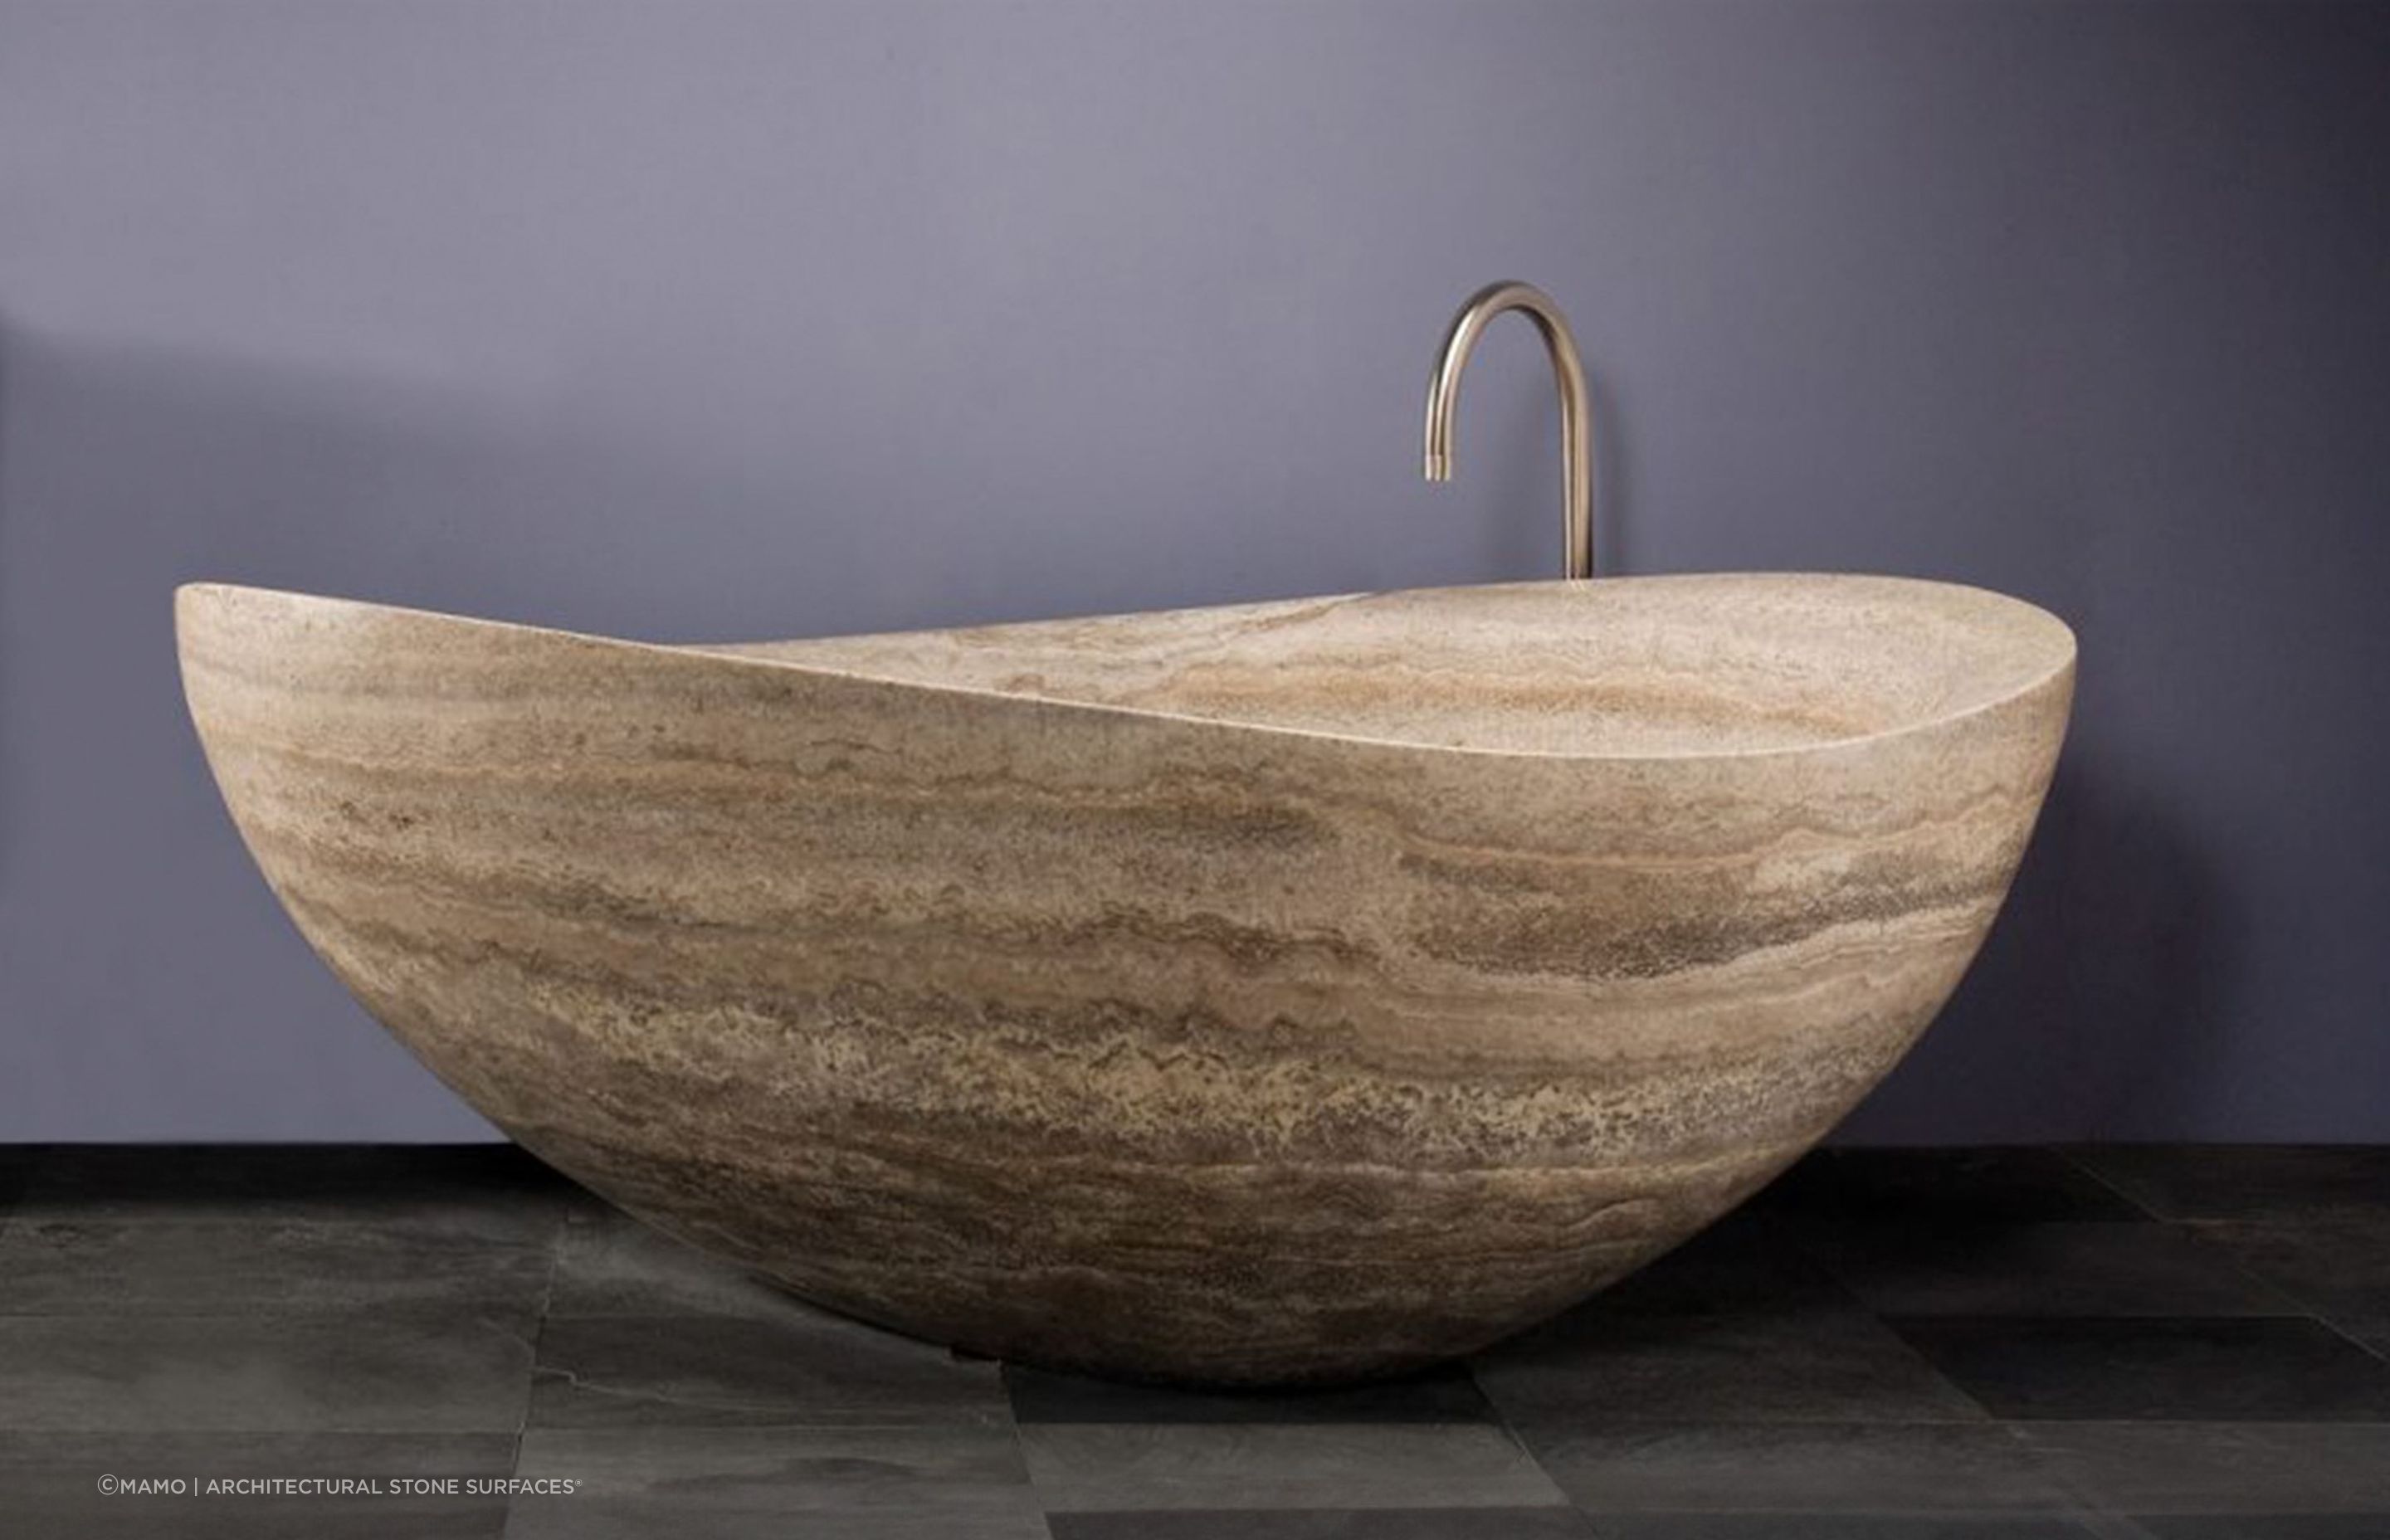 With earthy tones and a honeycomb texture, the Atollo Travertine Bath is the epitome of natural beauty.